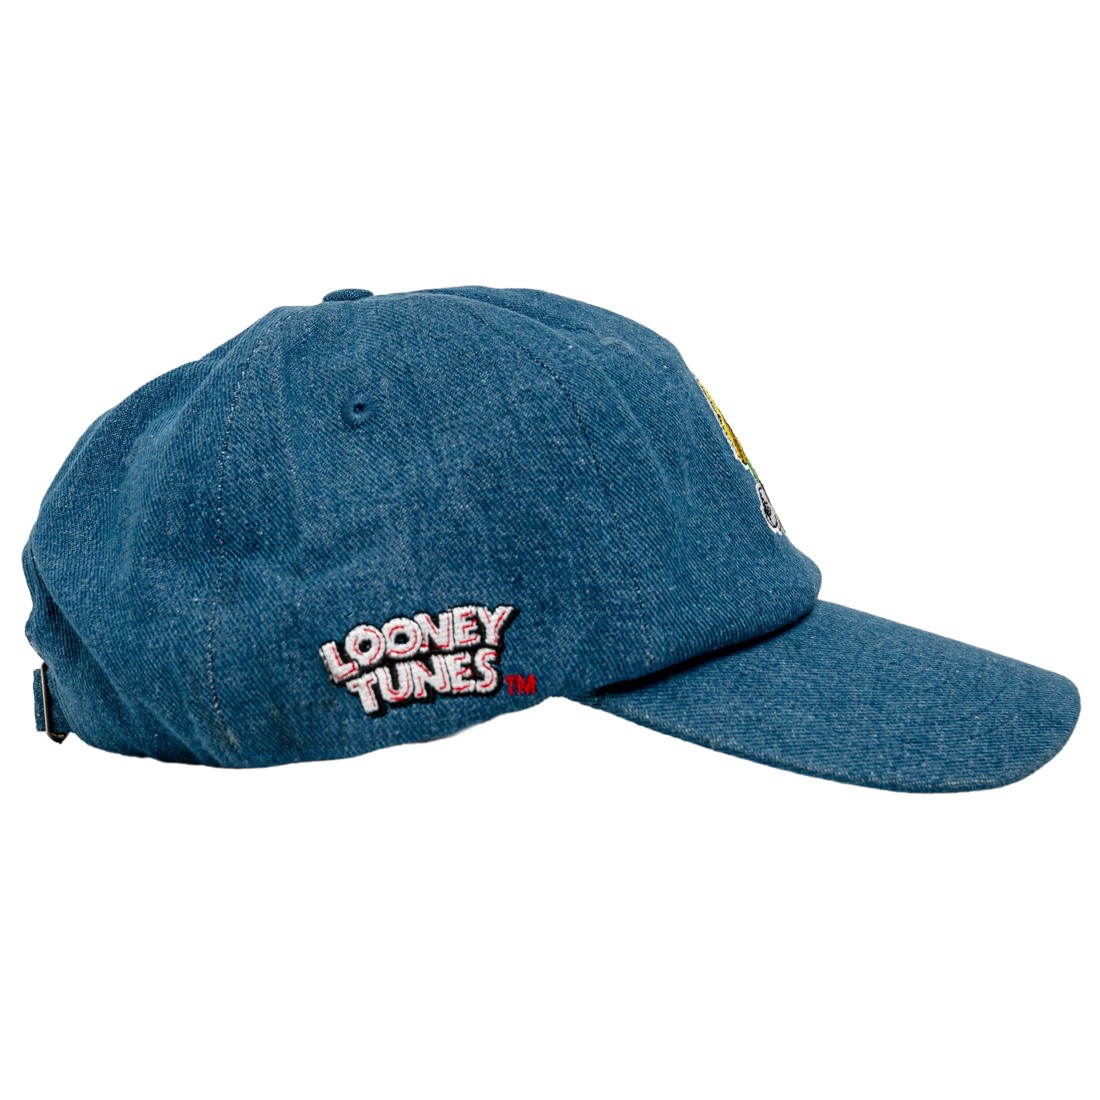 Enhance your style and get the right sun protection wearing ® Corduroy Trucker Bubble hat